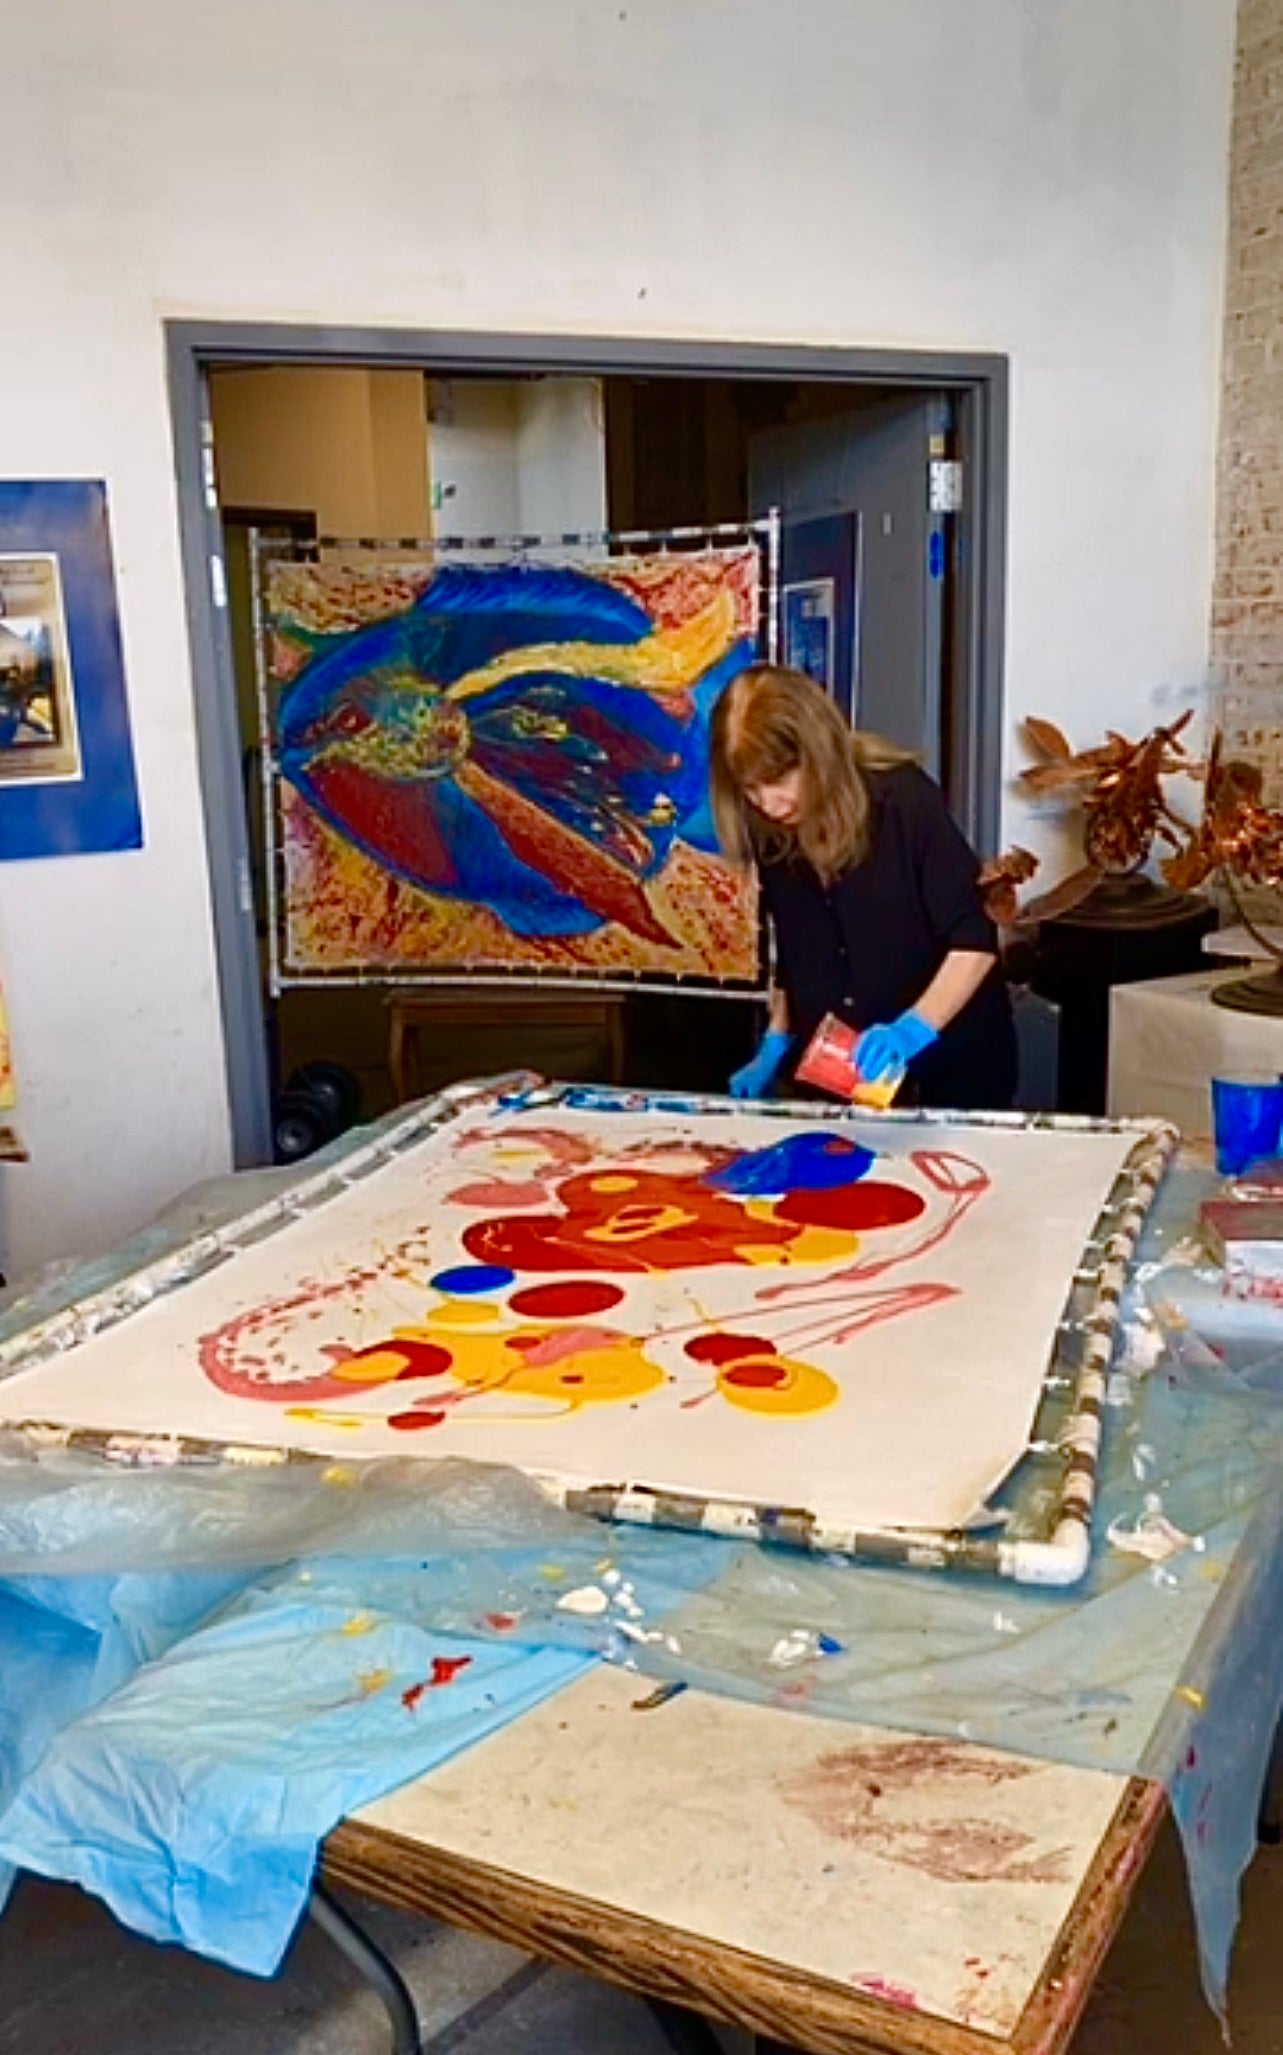 Here Shahla is creating an abstract painting with Acrylic paint on a French handmade paper.